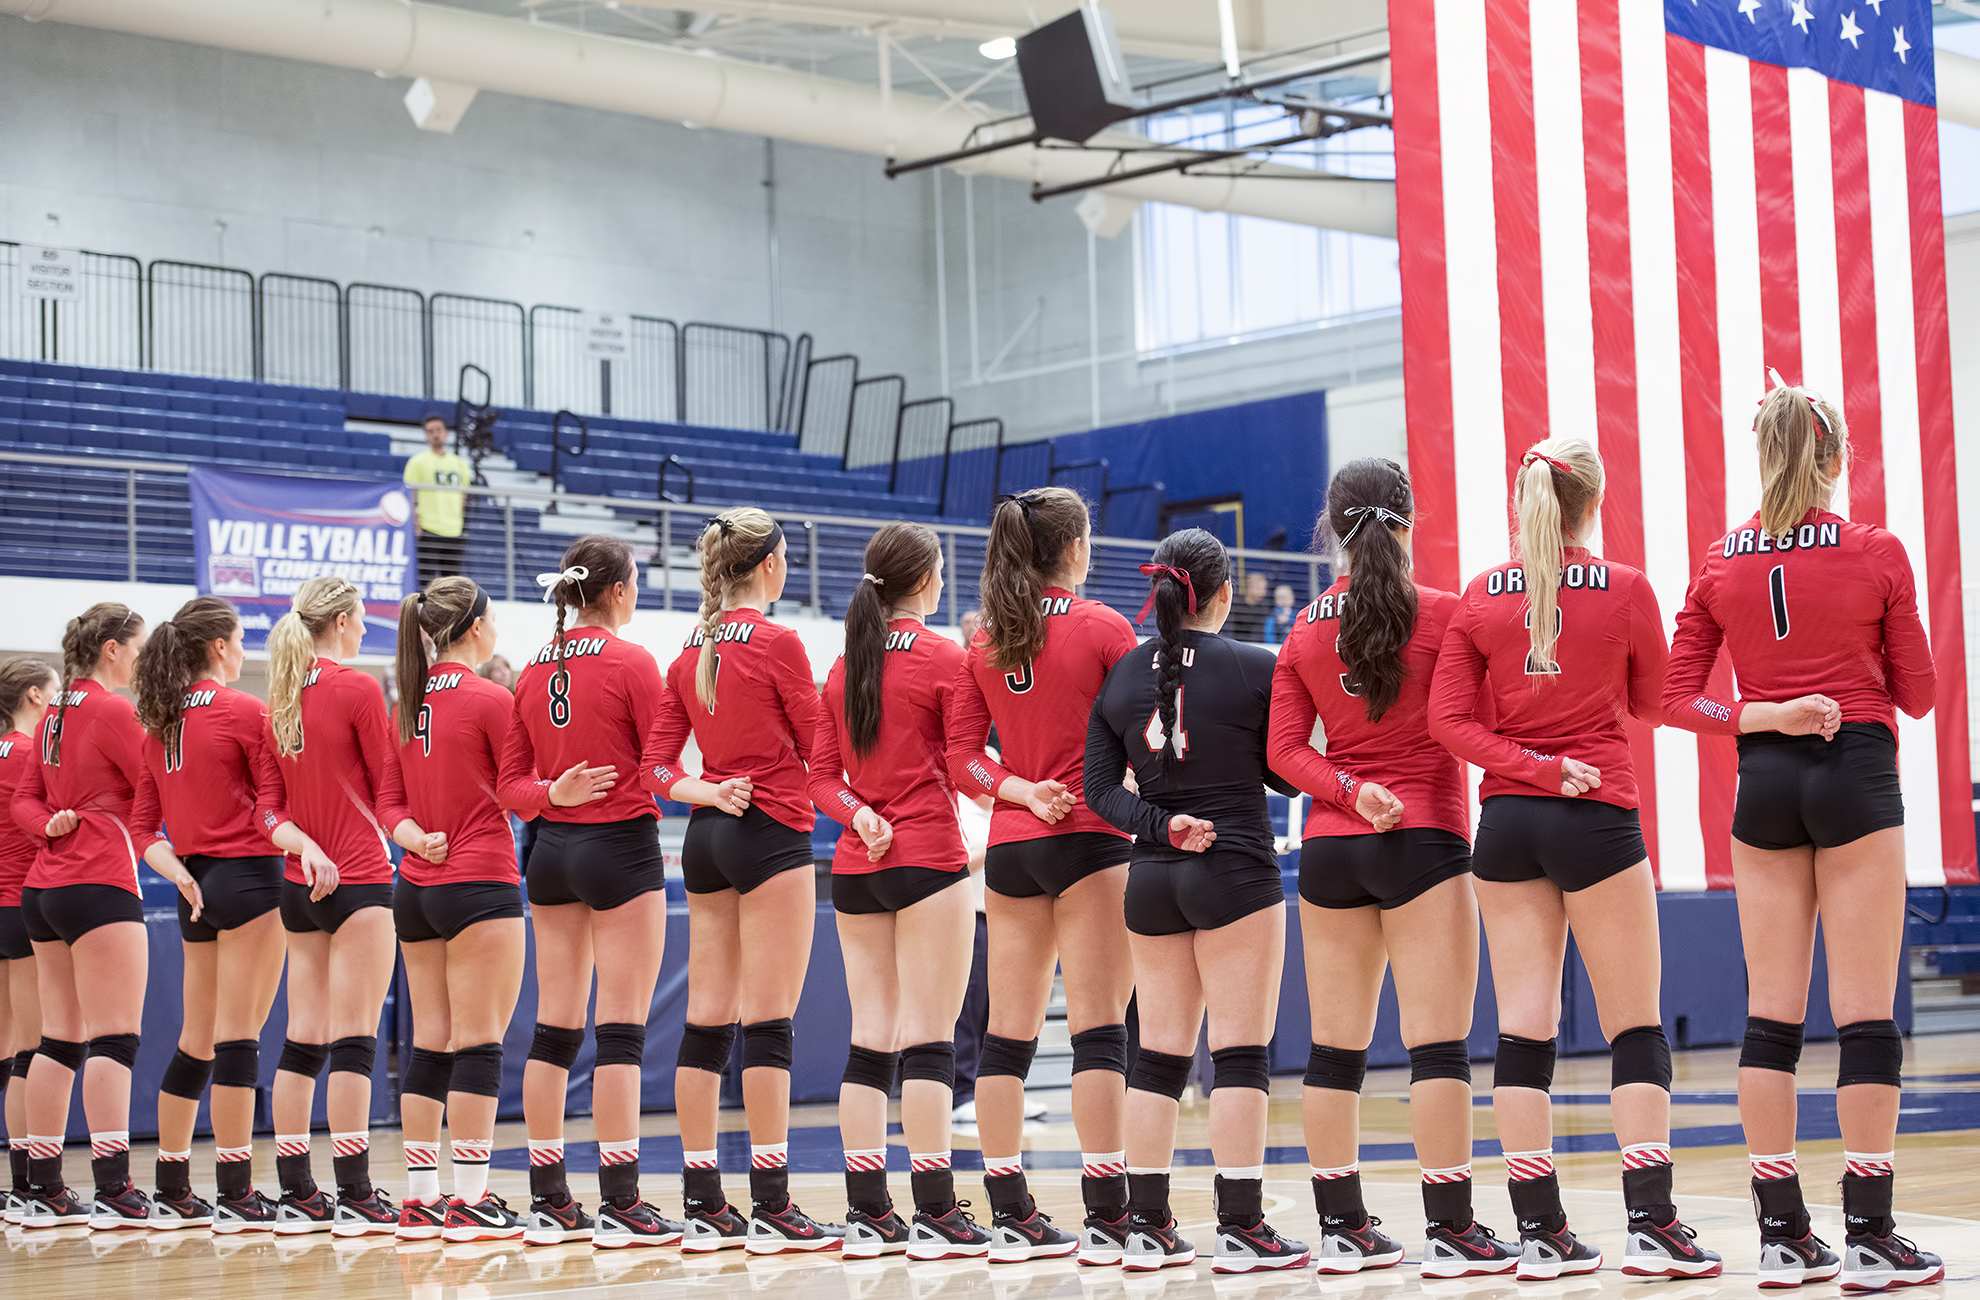 sou volleyball american flag